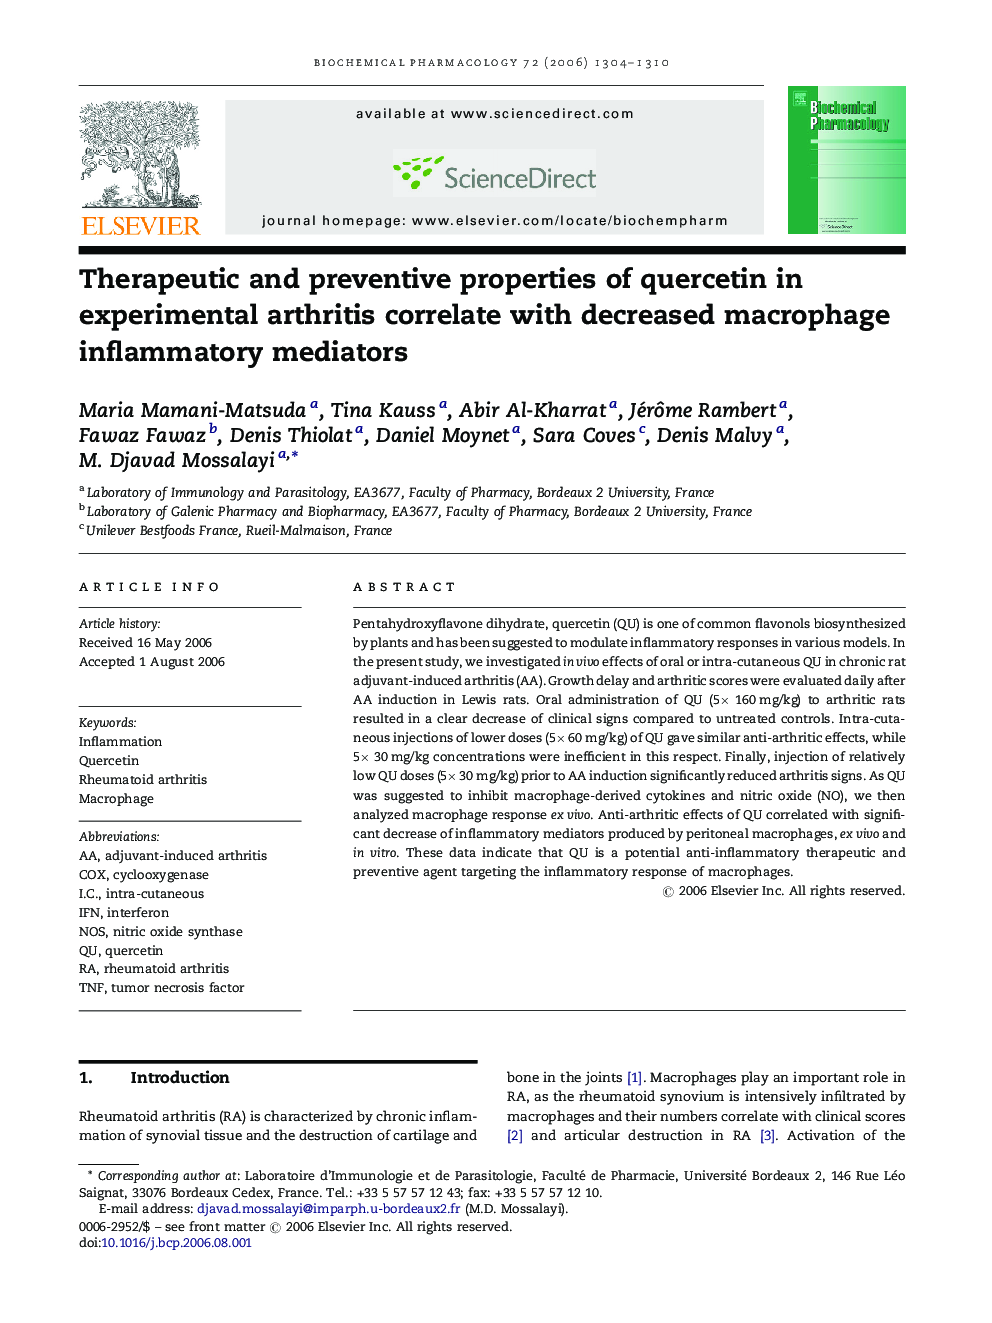 Therapeutic and preventive properties of quercetin in experimental arthritis correlate with decreased macrophage inflammatory mediators